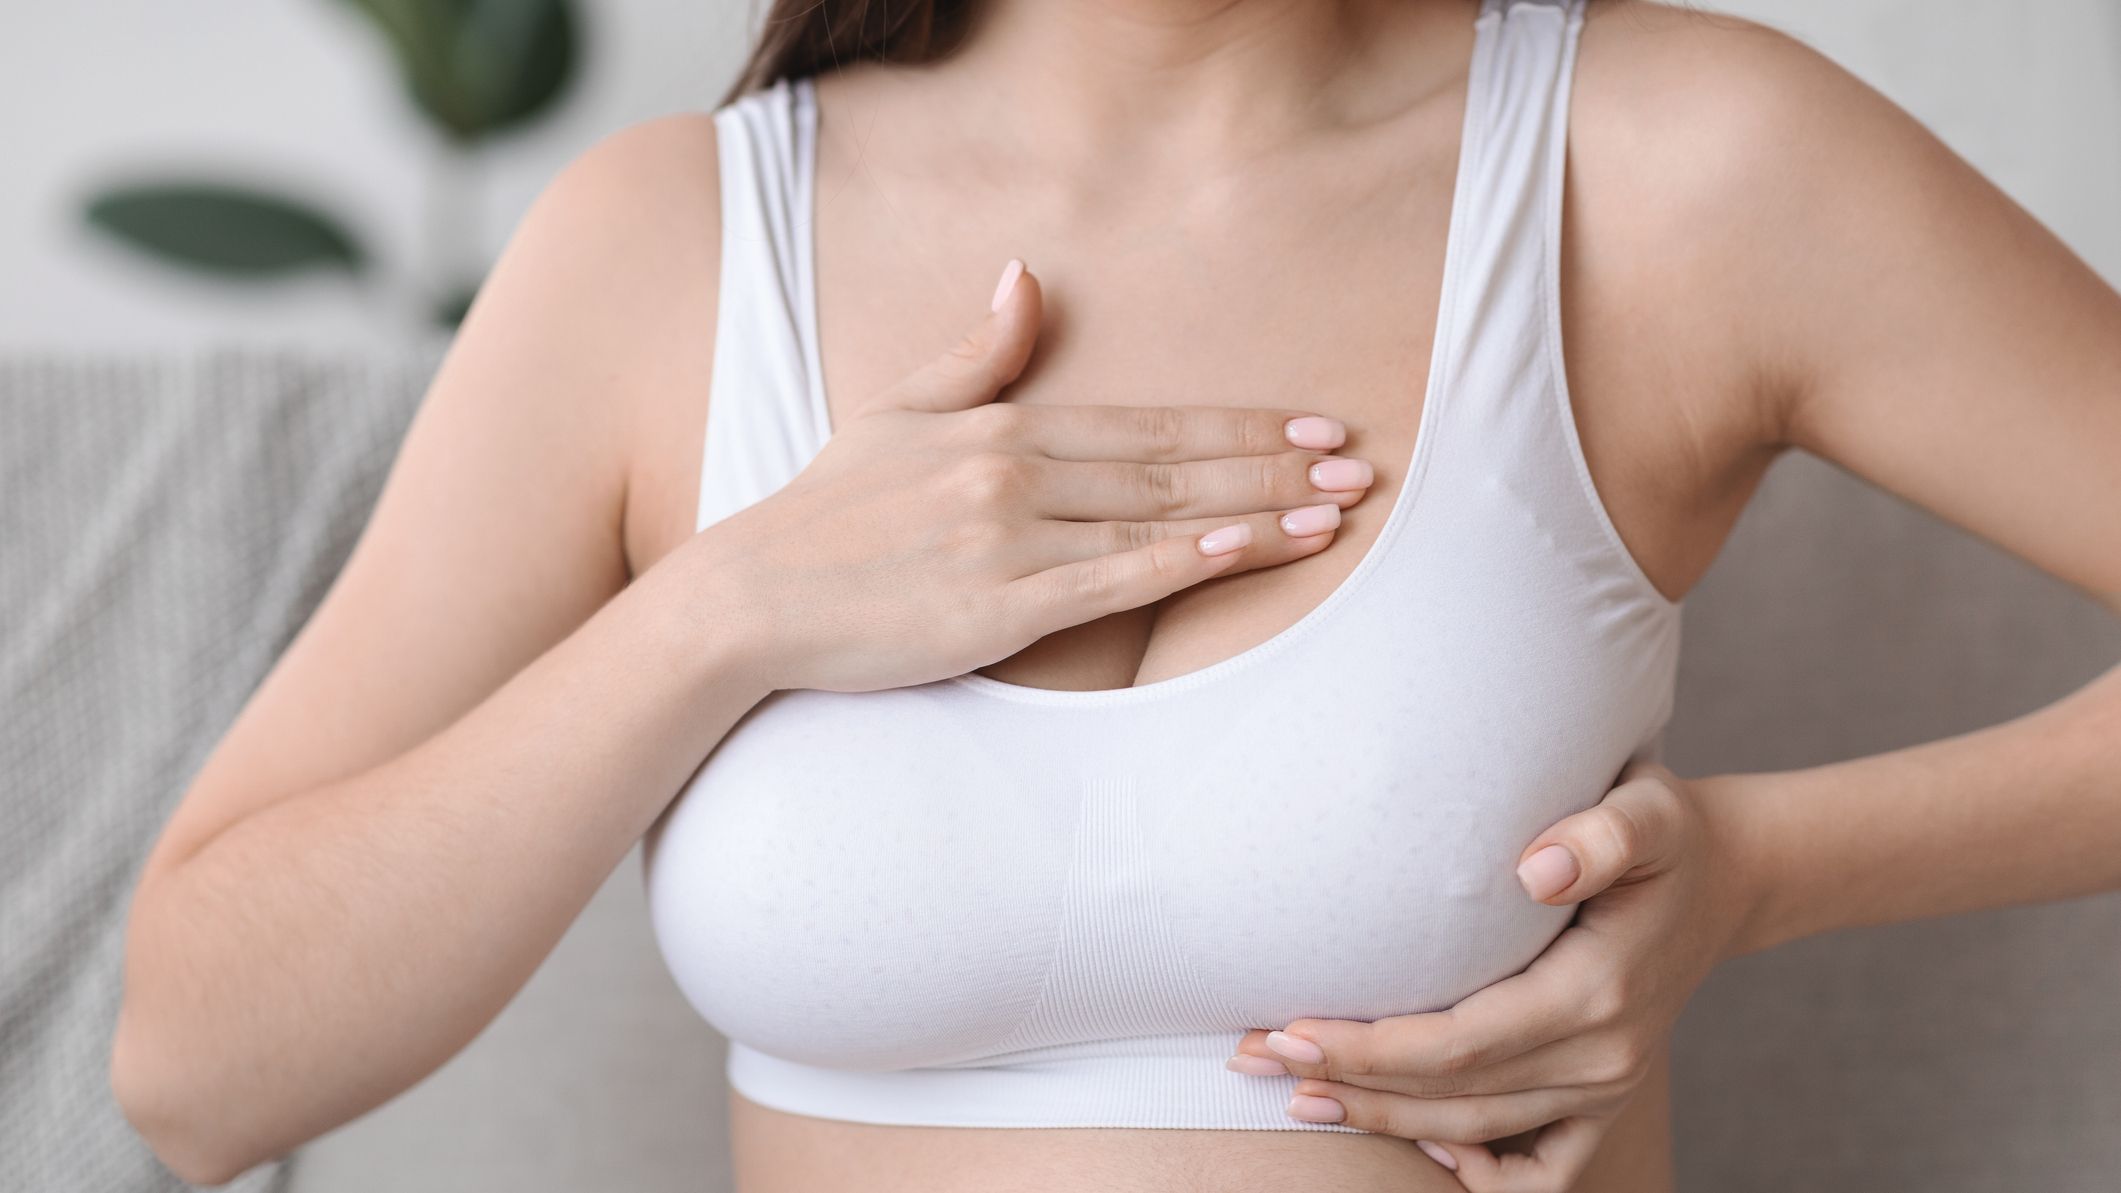 6 Common Health Issues Caused by Overly Large Breasts & How to